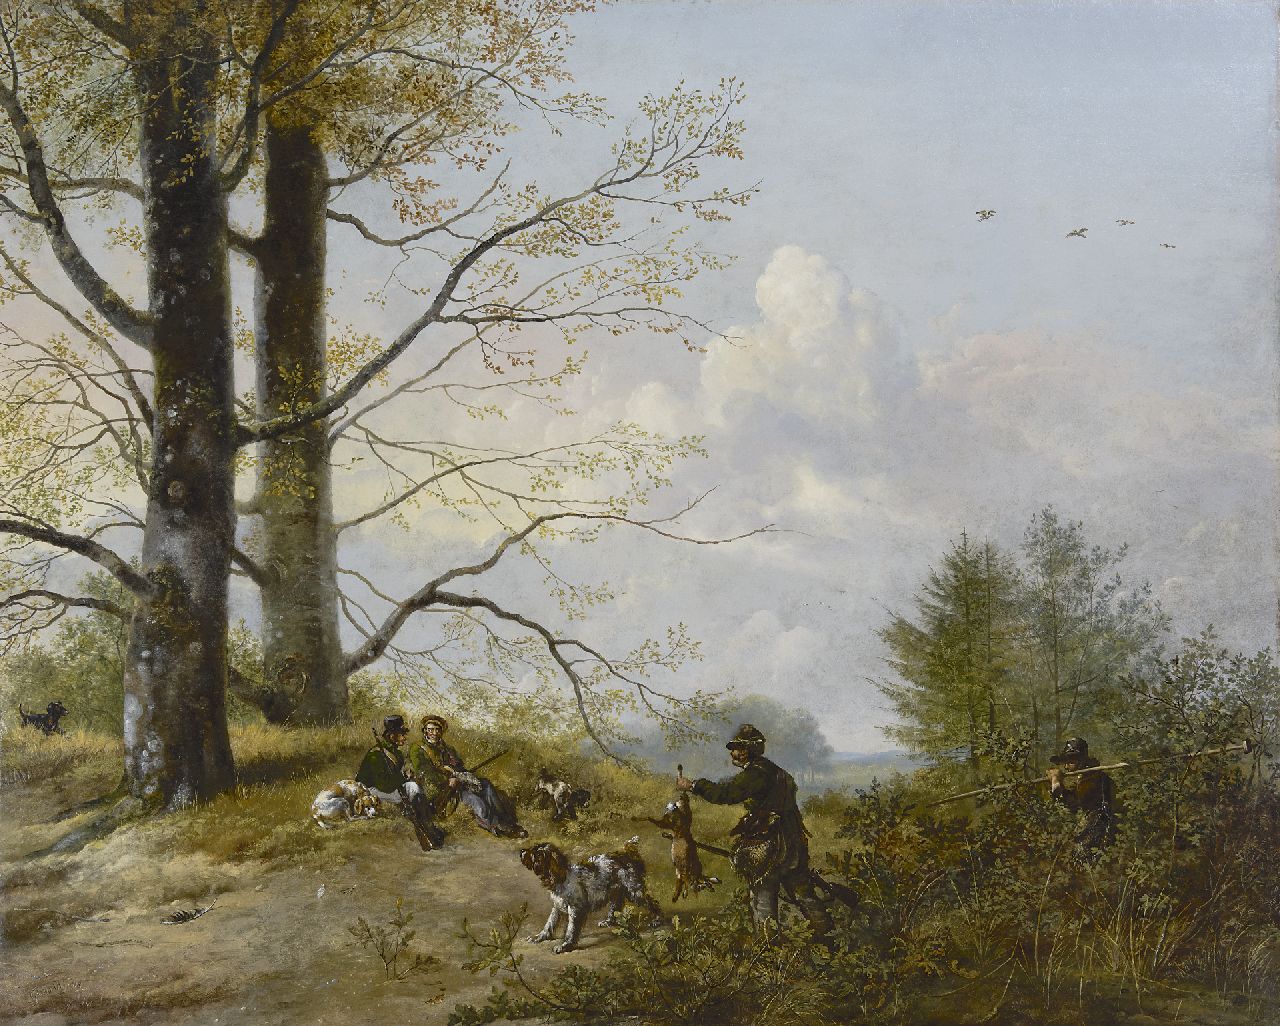 Os P.G. van | Pieter Gerardus van Os, After the hunt, oil on canvas 79.9 x 98.5 cm, signed l.l. and dated 1818